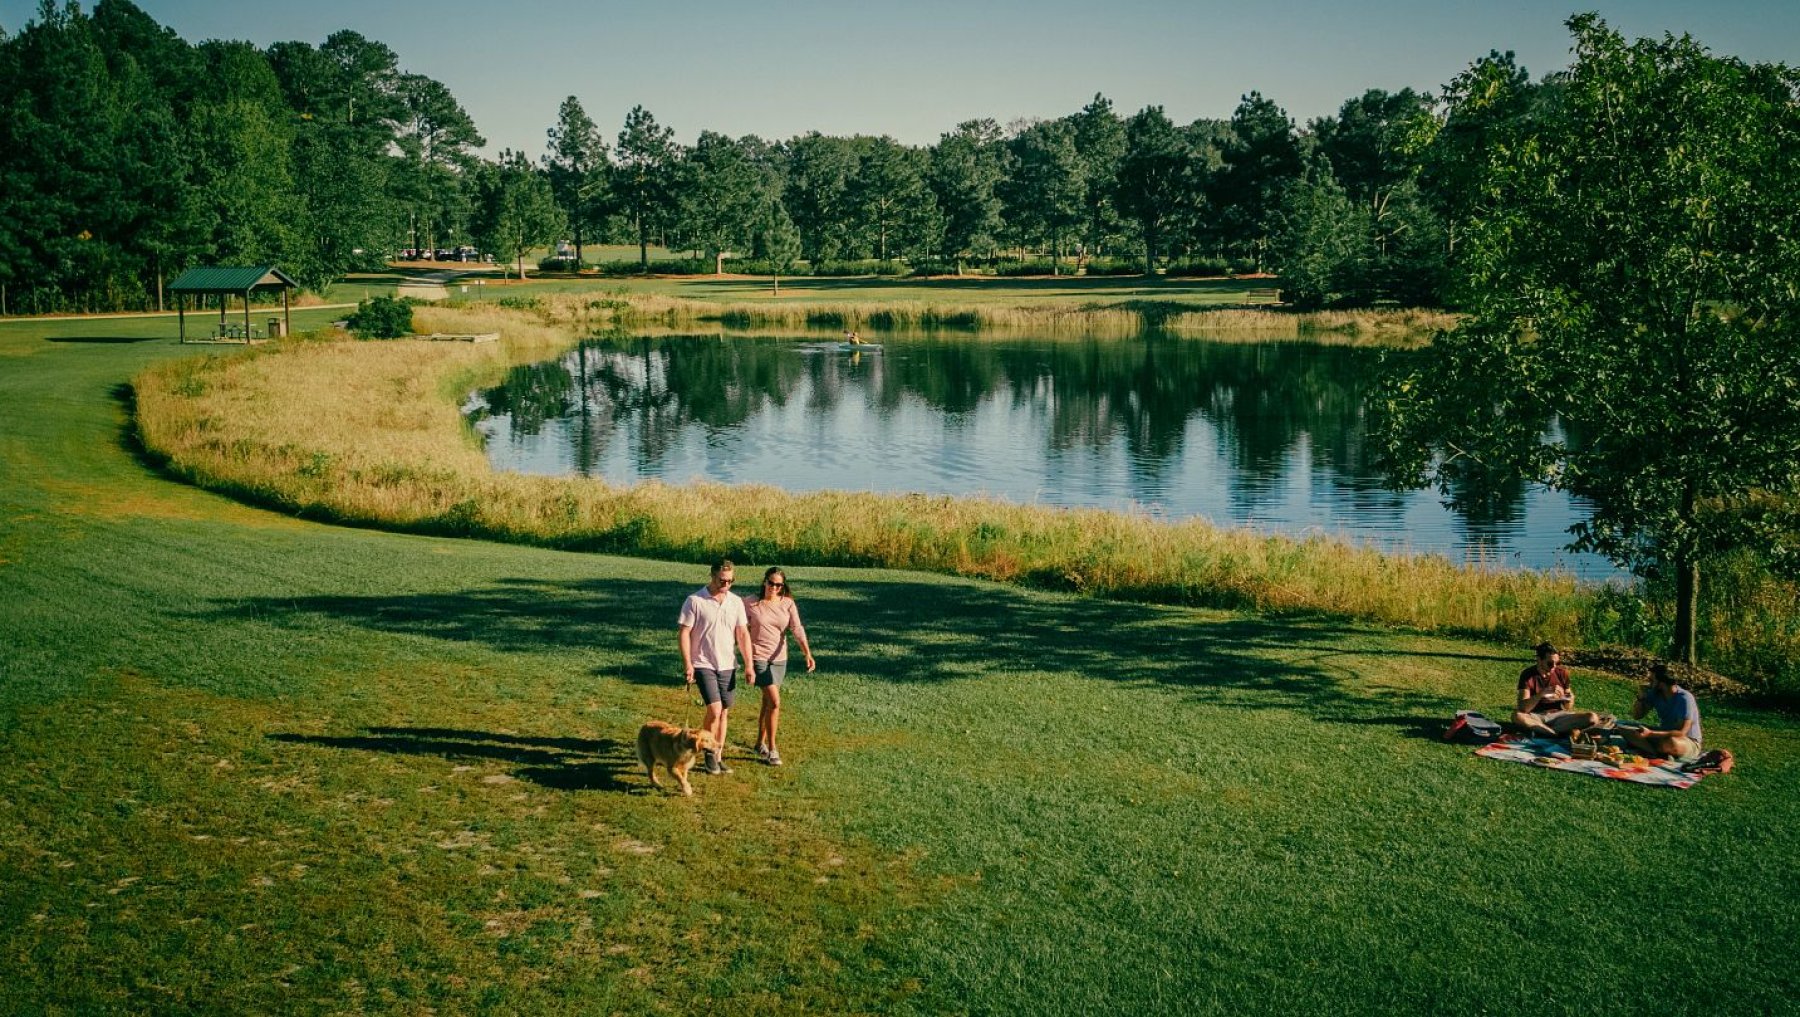 People walking a dog and picnicking near pond in a park